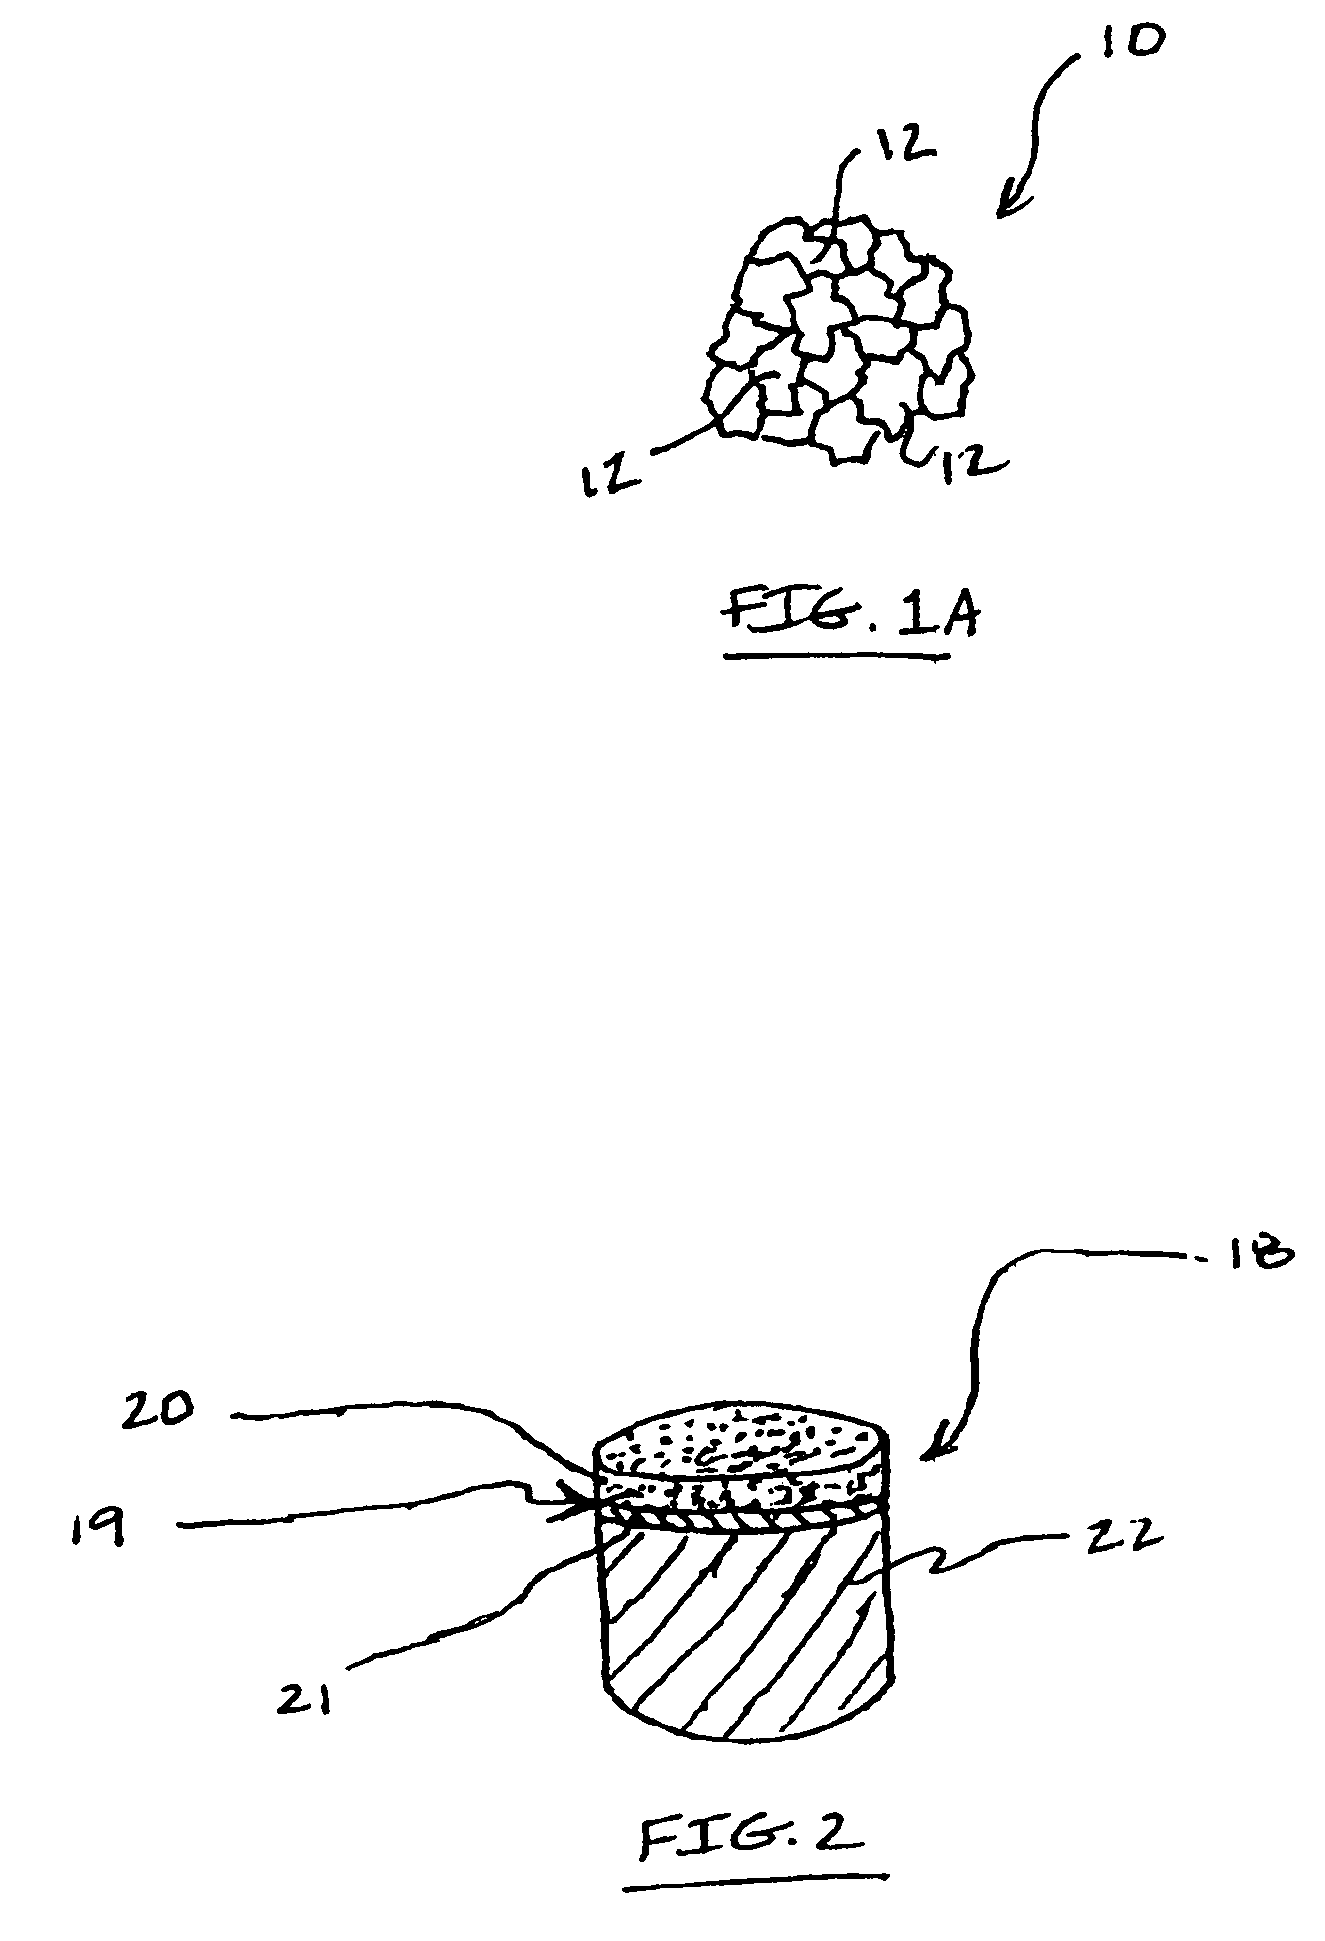 Polycrystalline diamond composite constructions comprising thermally stable diamond volume